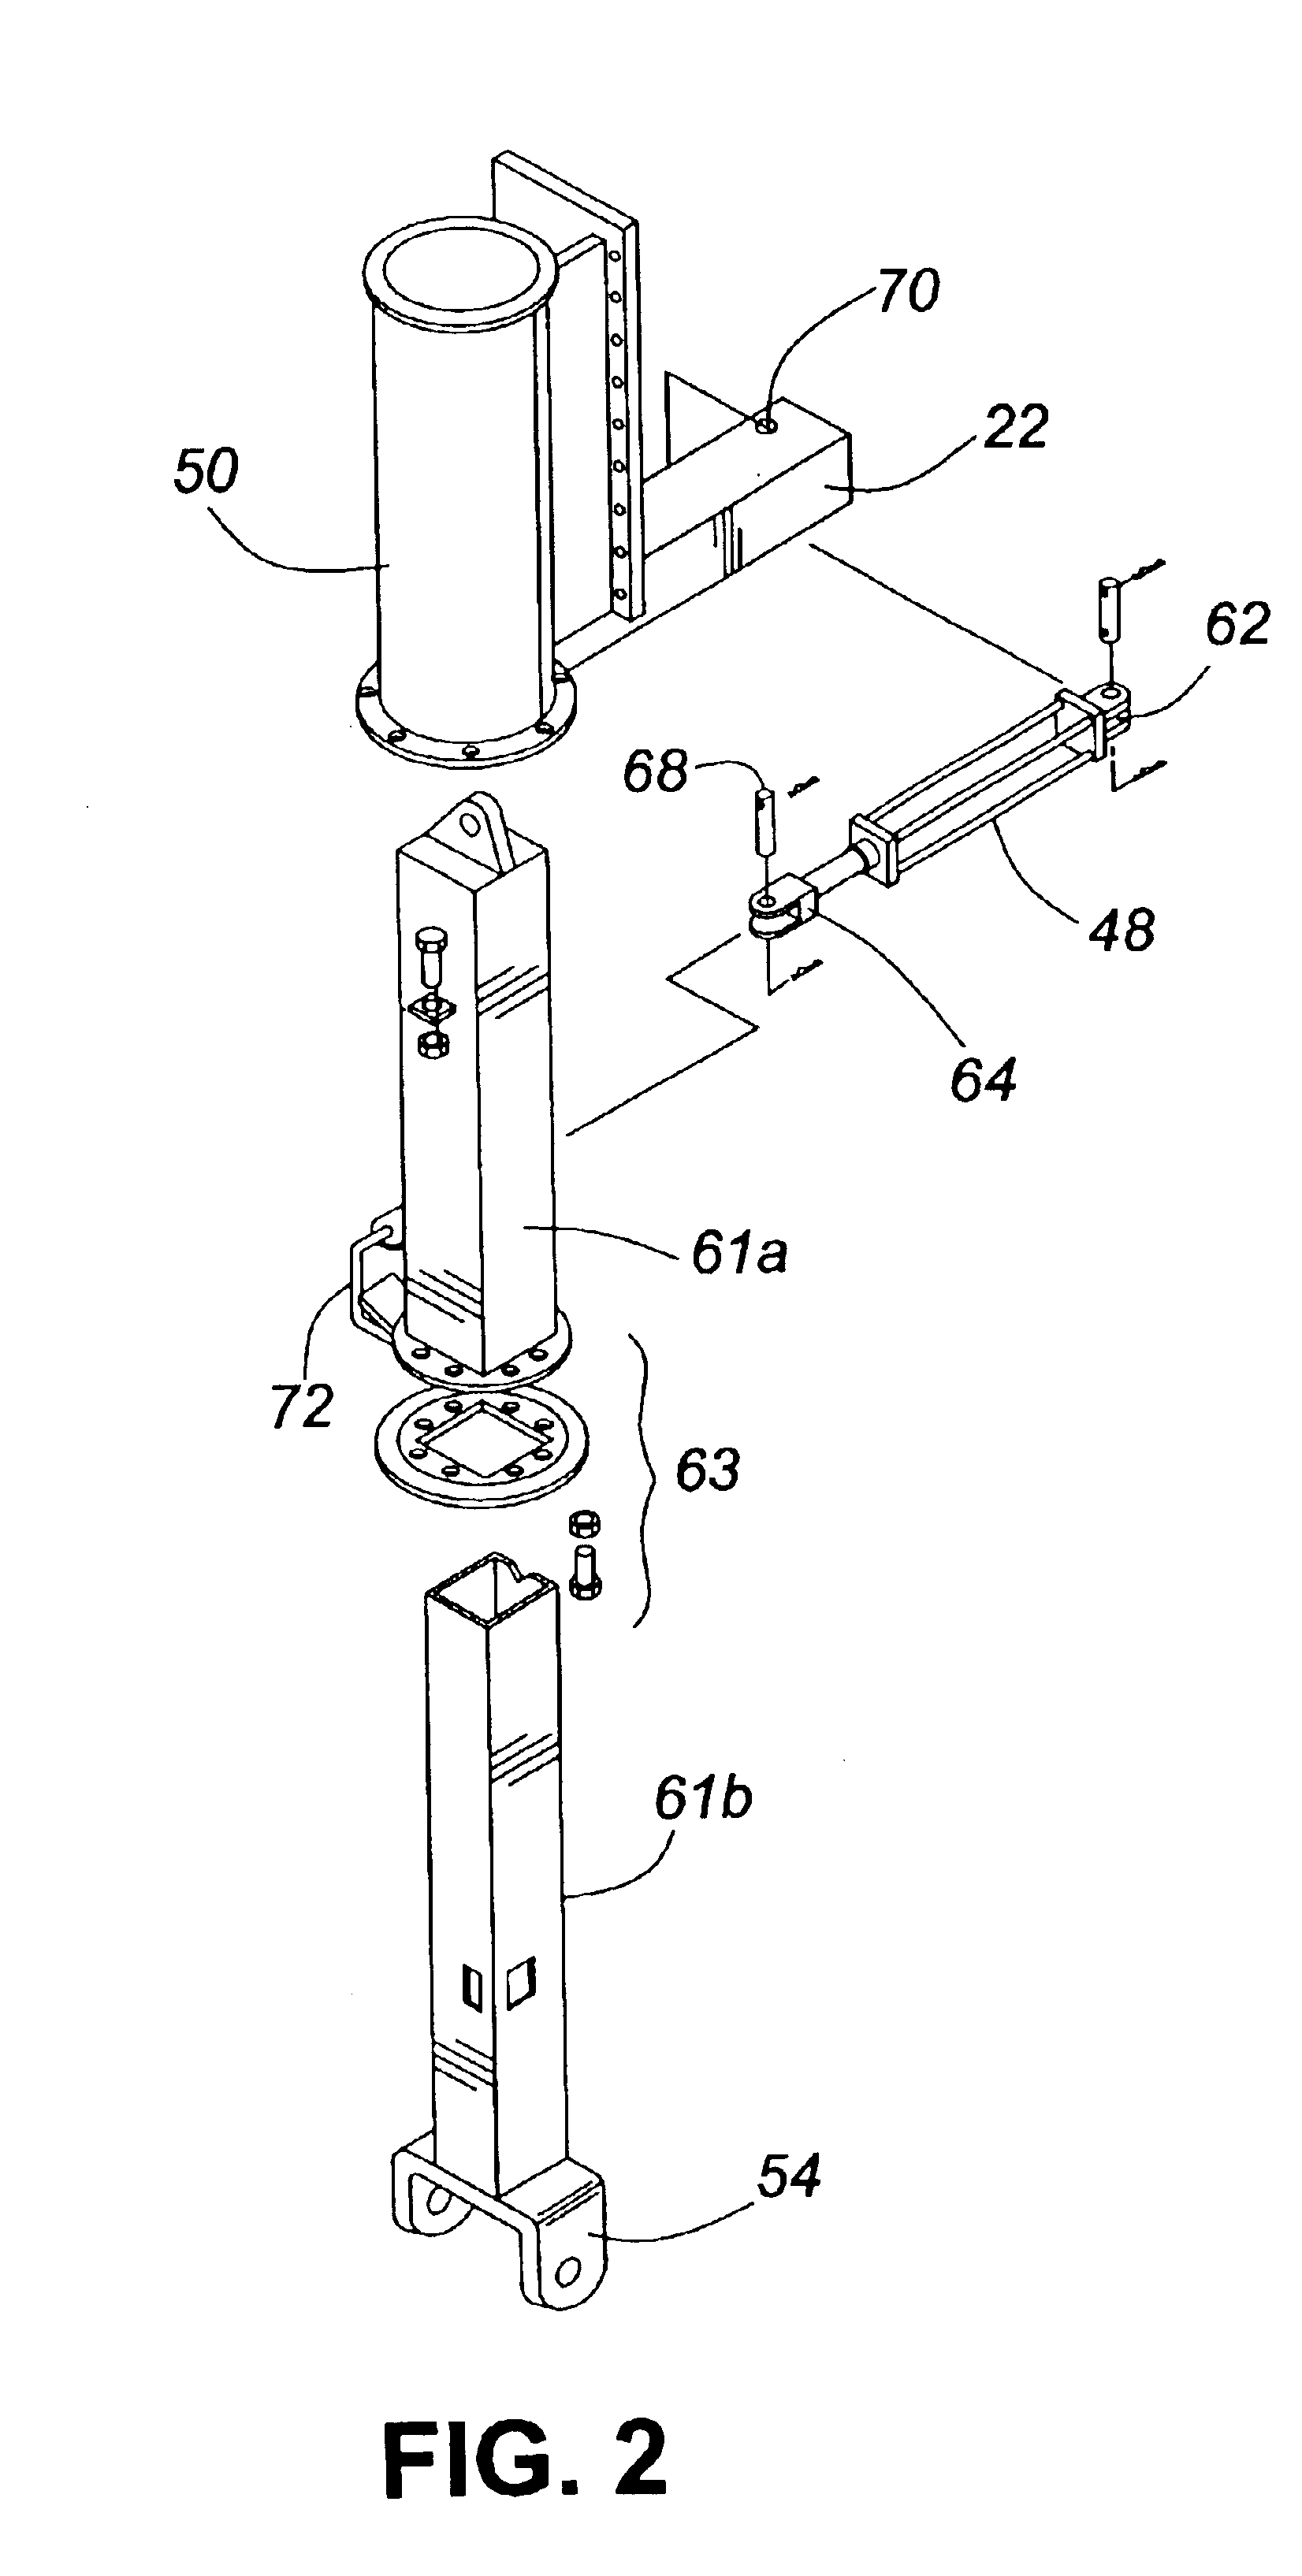 Device for forming tight radius curbs and gutters with a paving machine